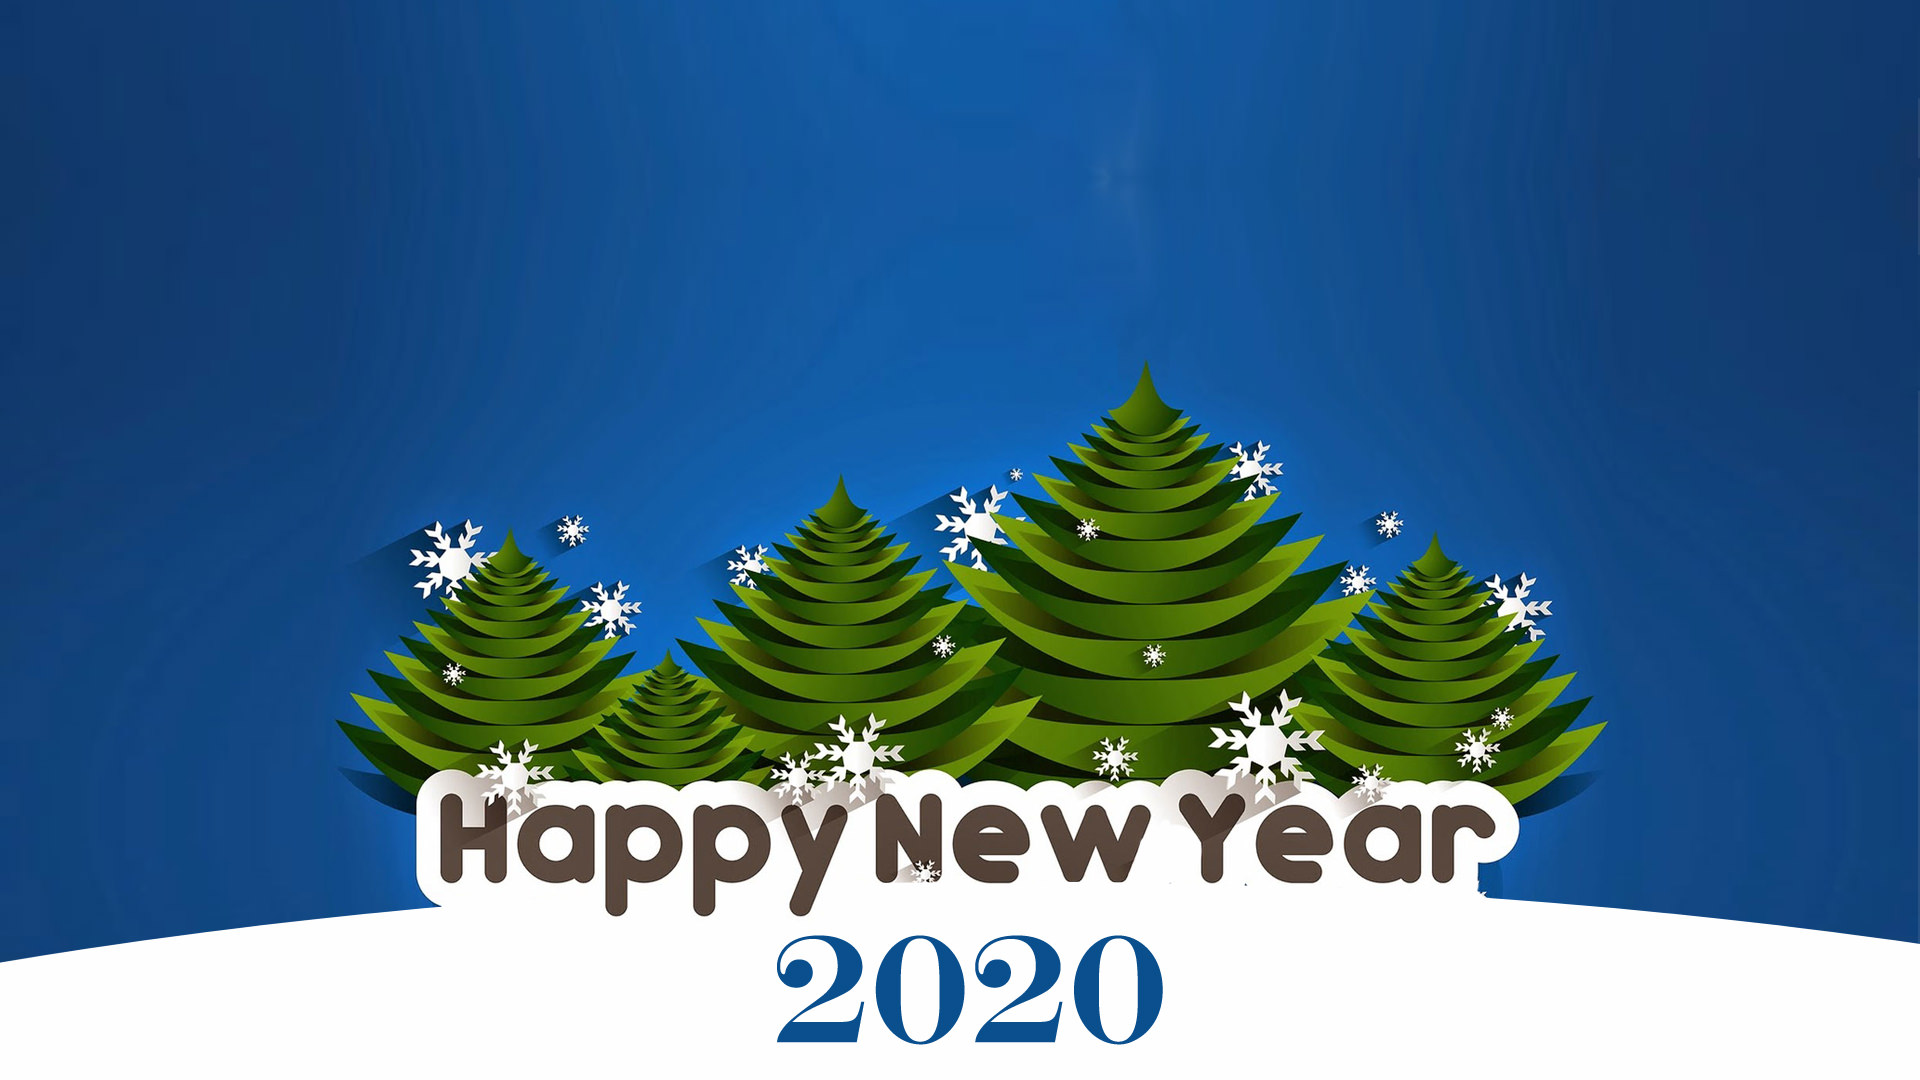 Awesome Happy New Year 2020 Wallpaper